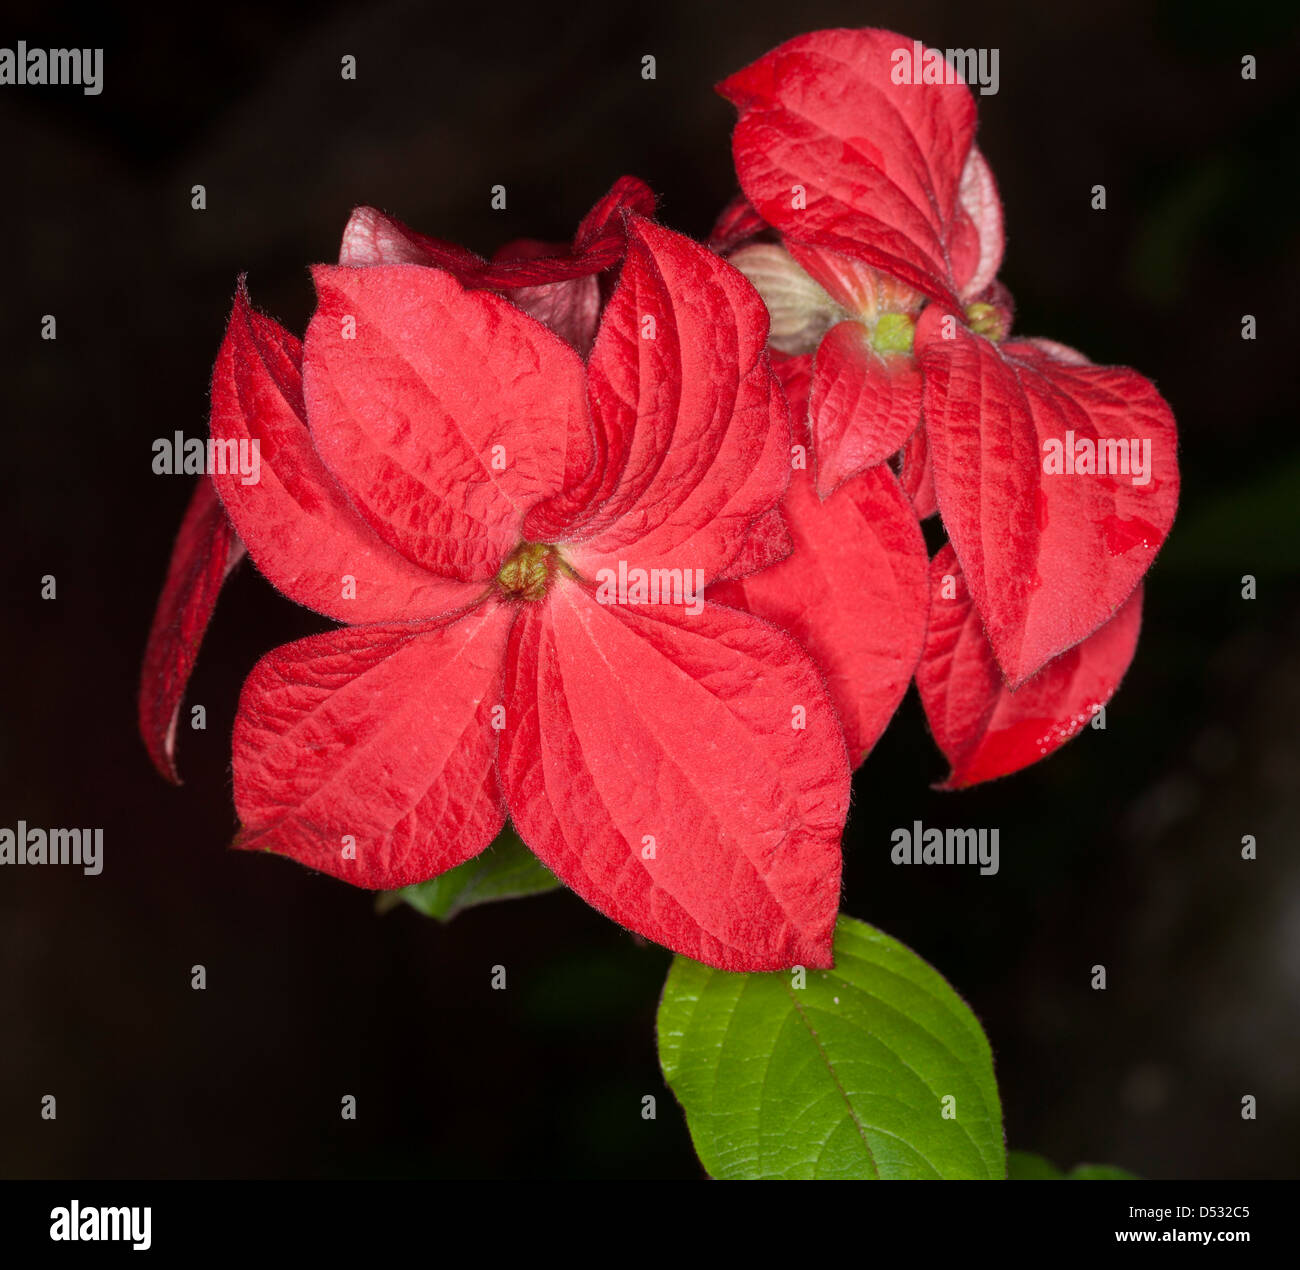 Cluster of gaudy red bracts and bright green leaves of Mussaenda 'Capricorn Dream' against a black background Stock Photo